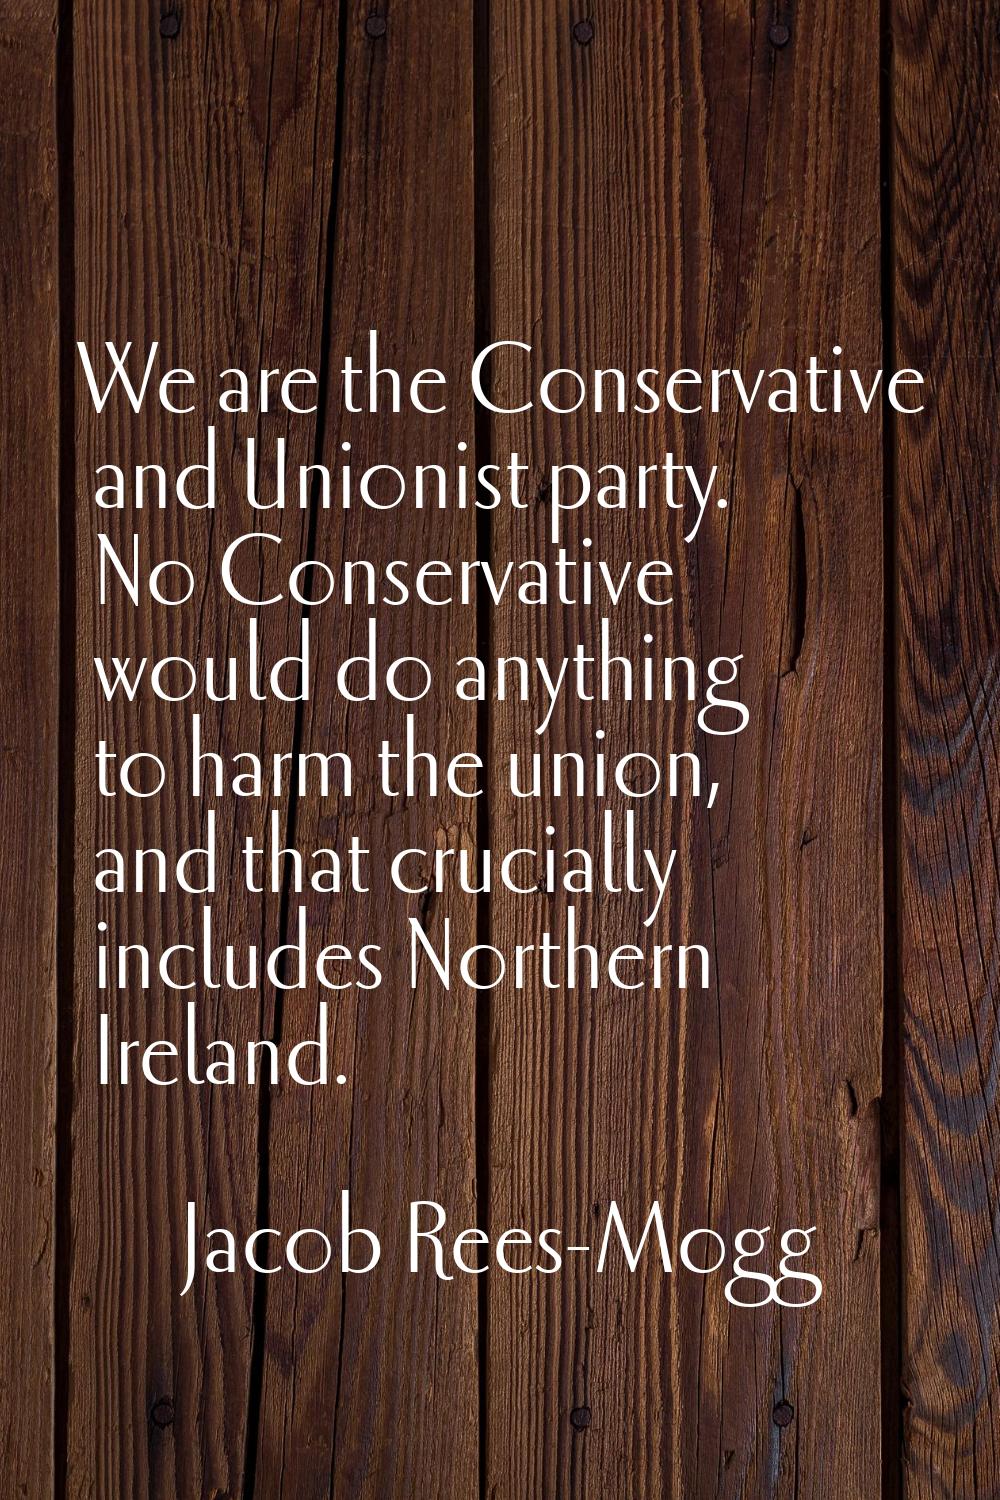 We are the Conservative and Unionist party. No Conservative would do anything to harm the union, an